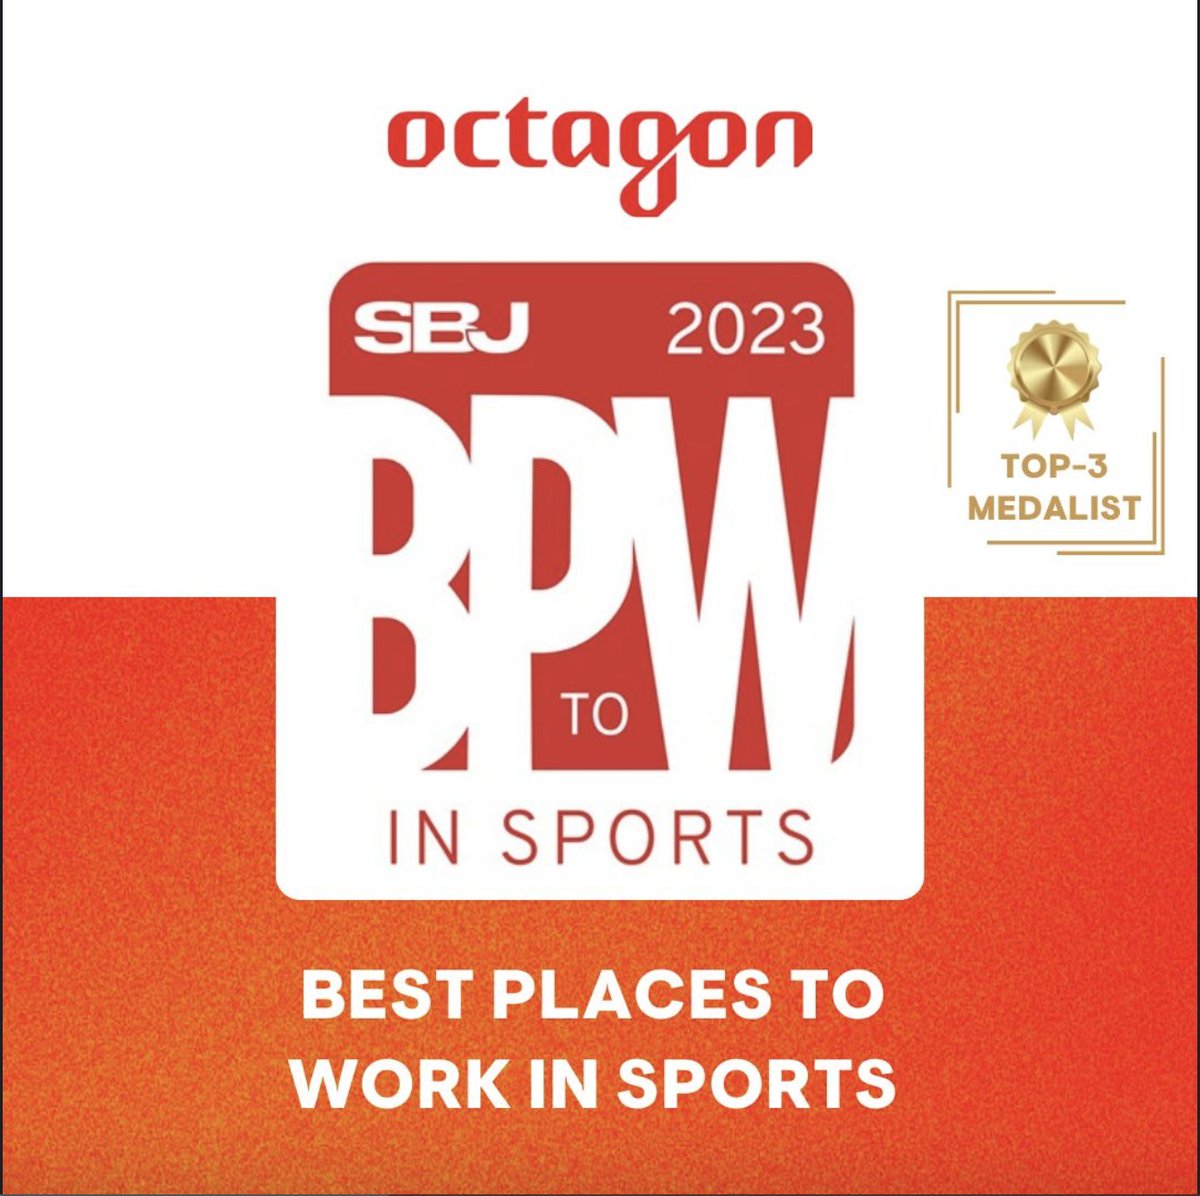 Honoured to be named by @SBJ as one of the 'Best Places to Work in Sports.' 🏆👏 We are proud of the tremendous culture and community we have built at Octagon, and the best-in-class work we continue to produce for our clients around the world.